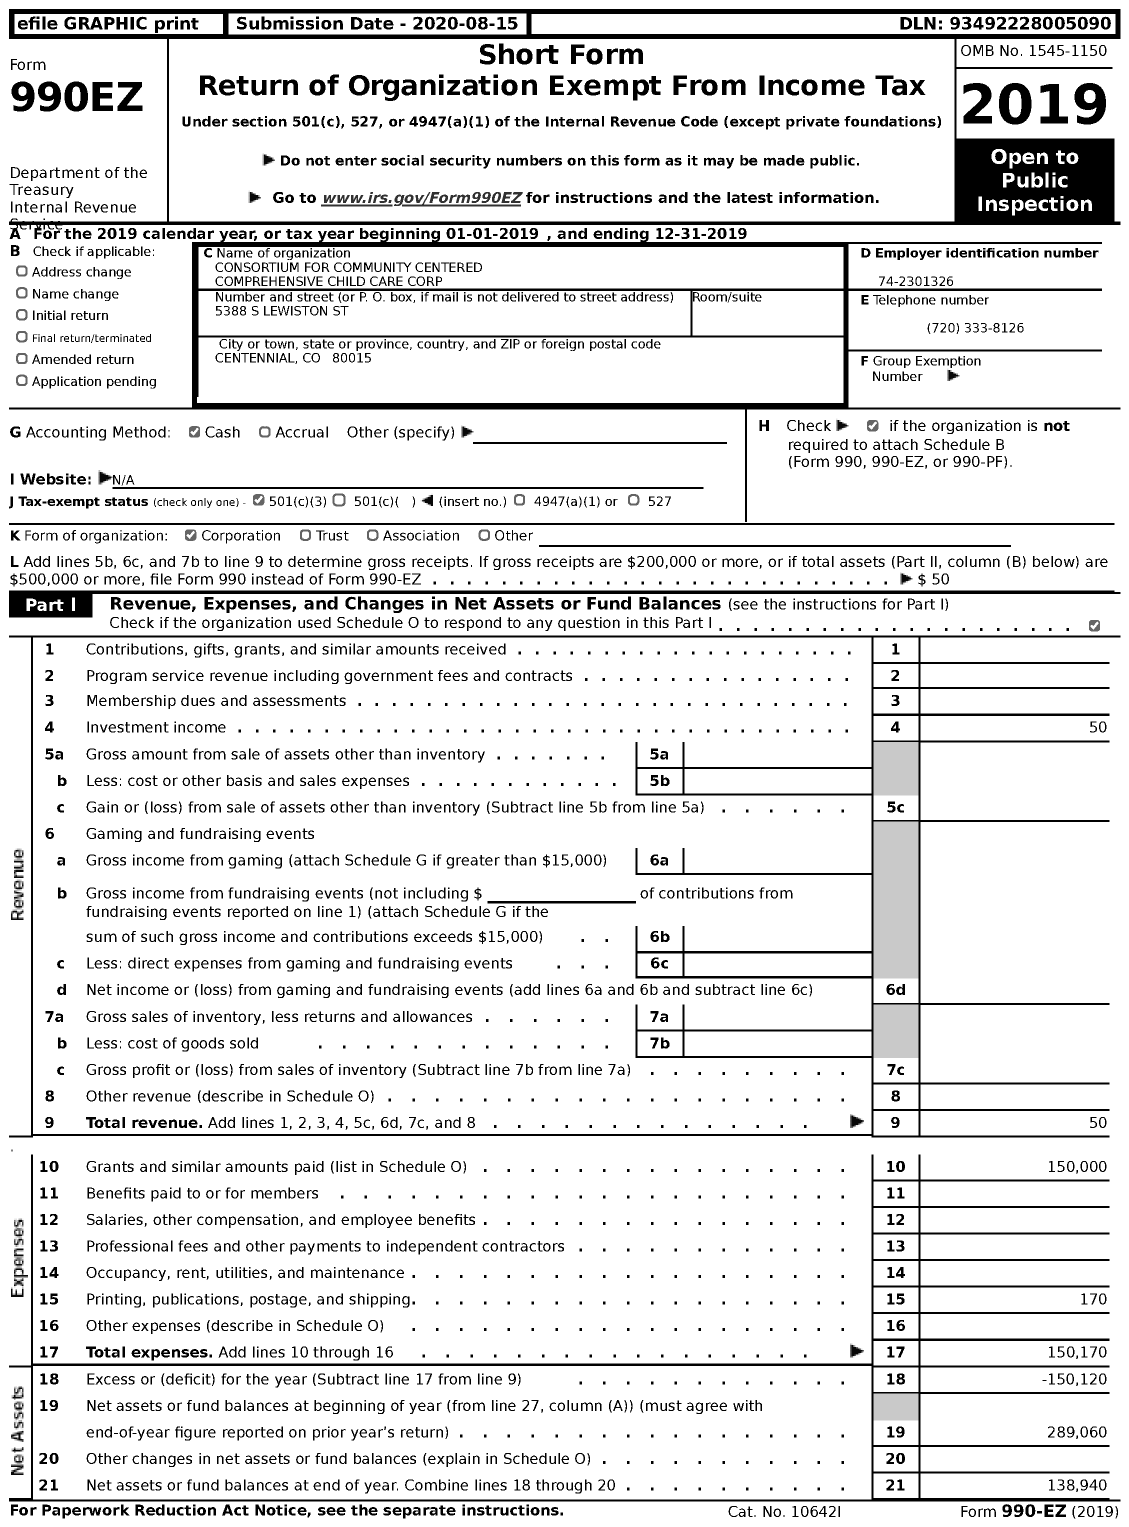 Image of first page of 2019 Form 990EZ for Consortium for Community Centered Comprehensive Child Care Corporation